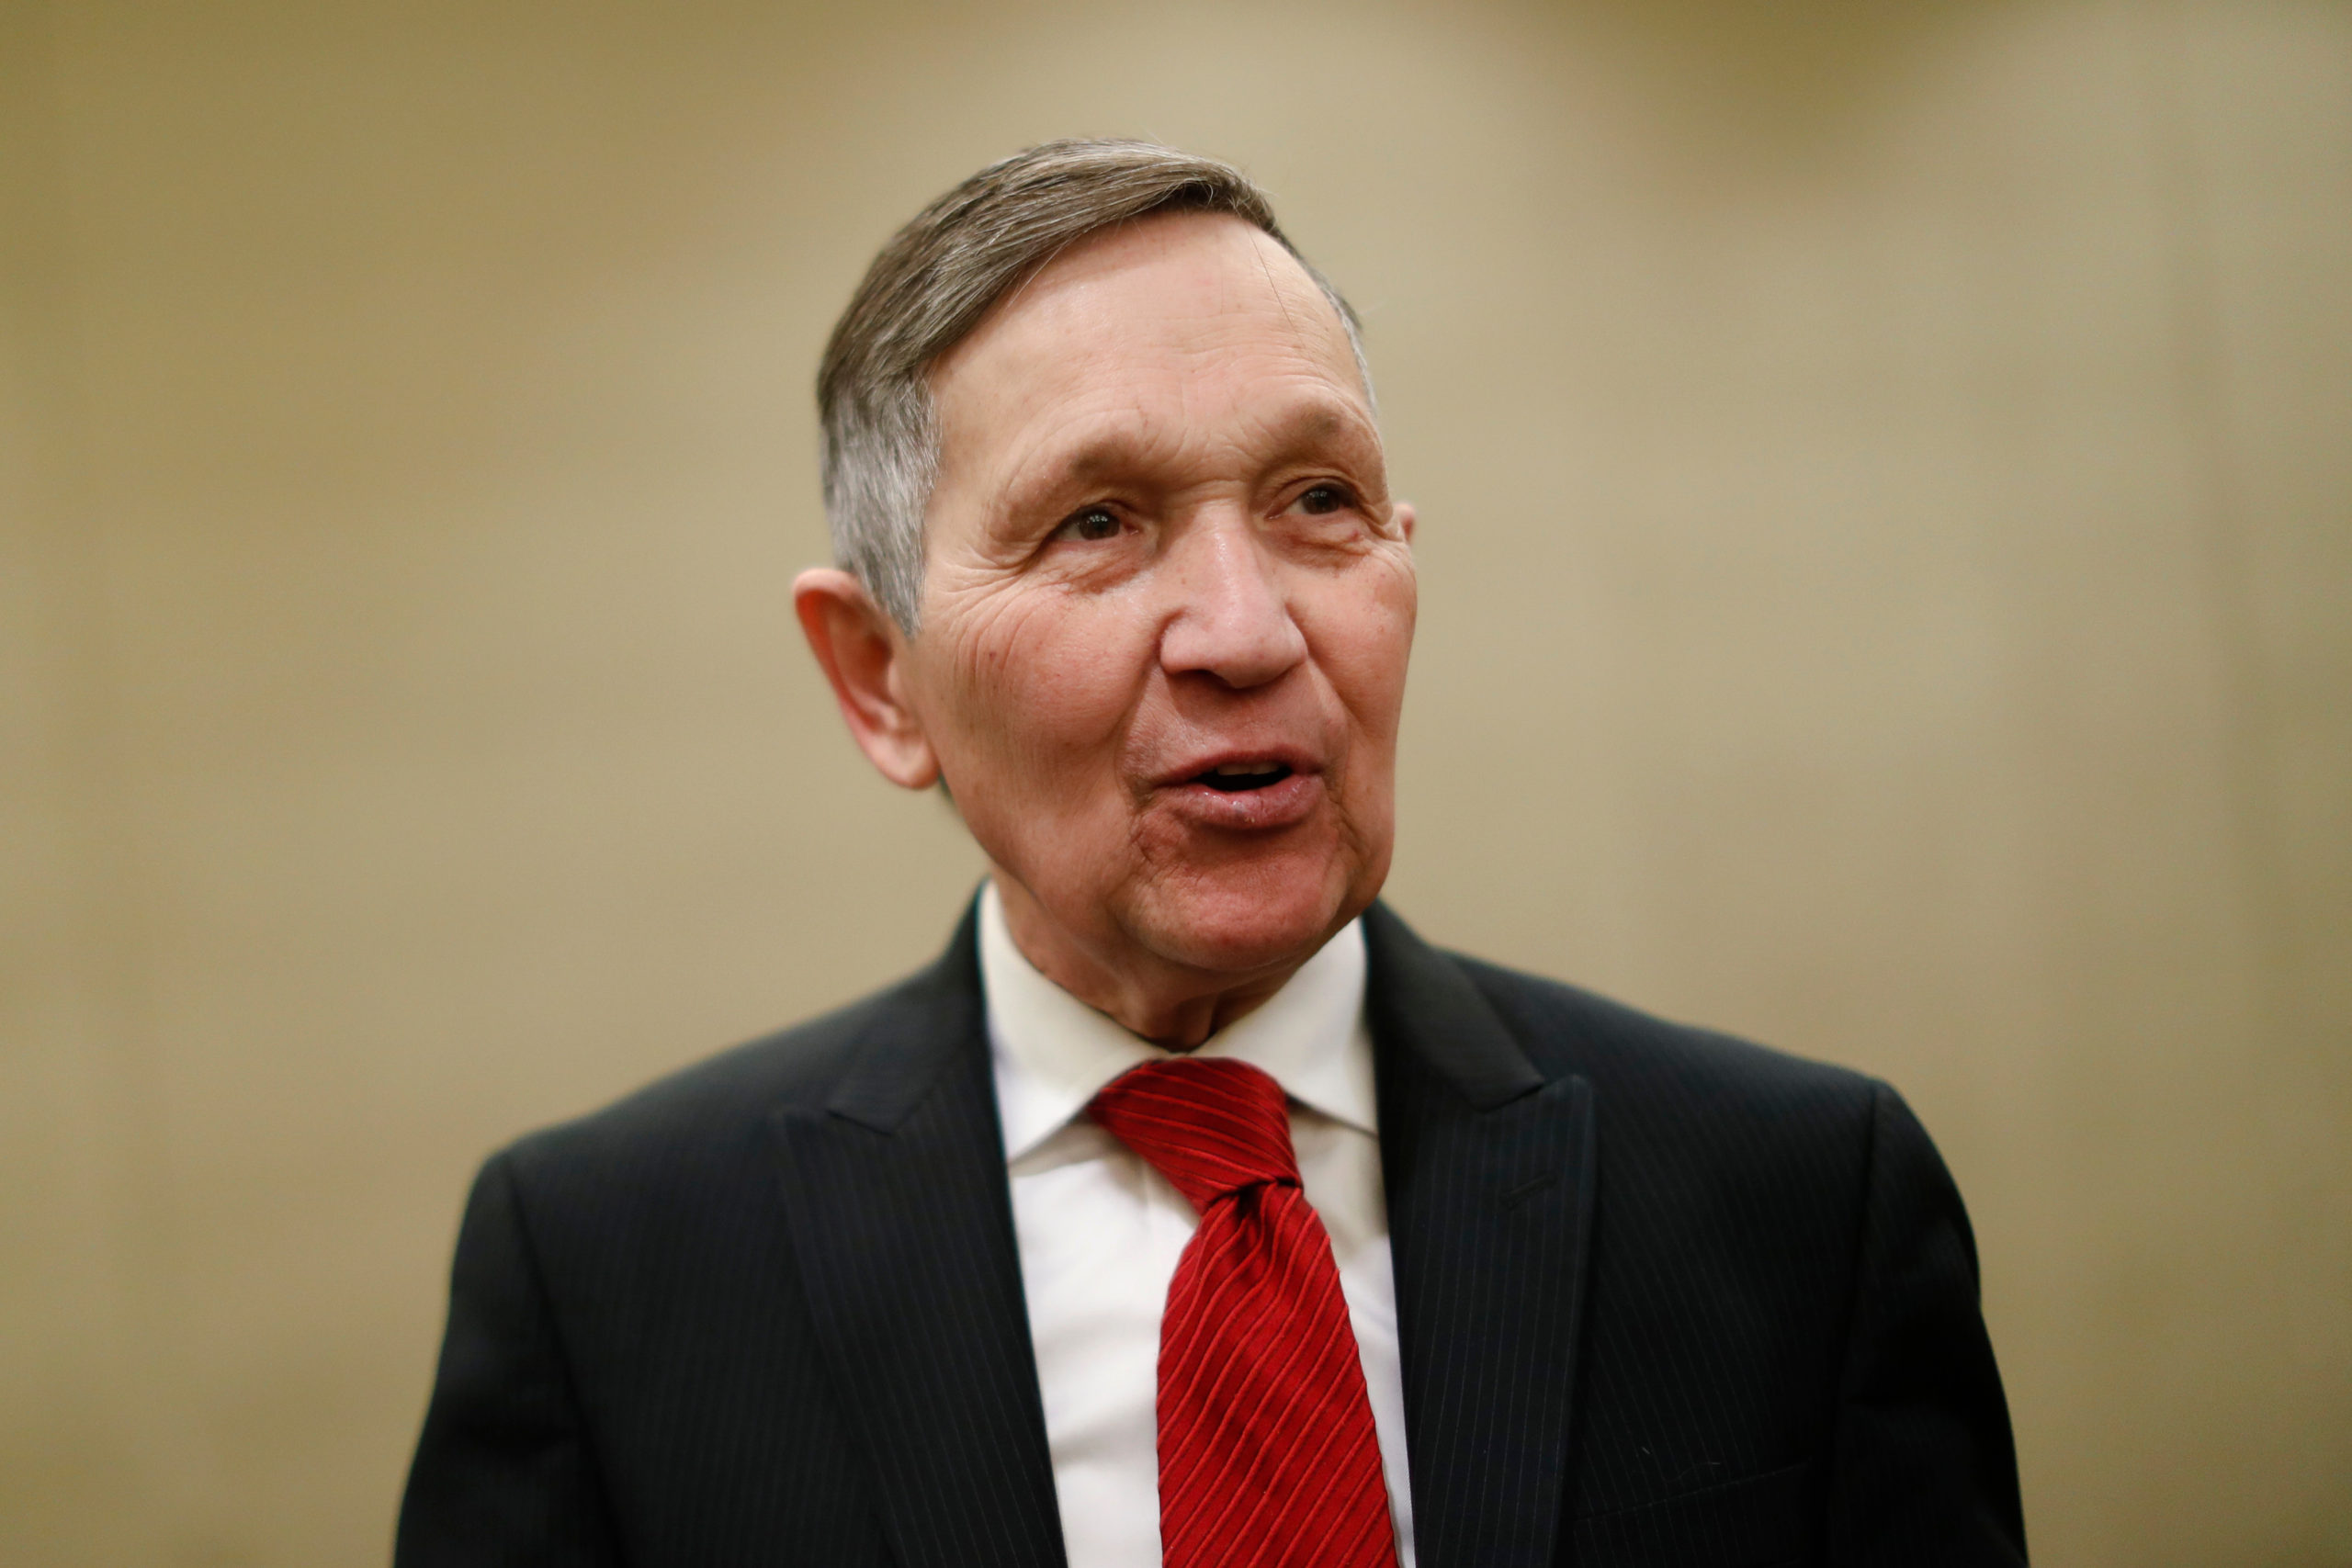 Former Congressman Dennis Kucinich announces his run for governor of Ohio in 2018.